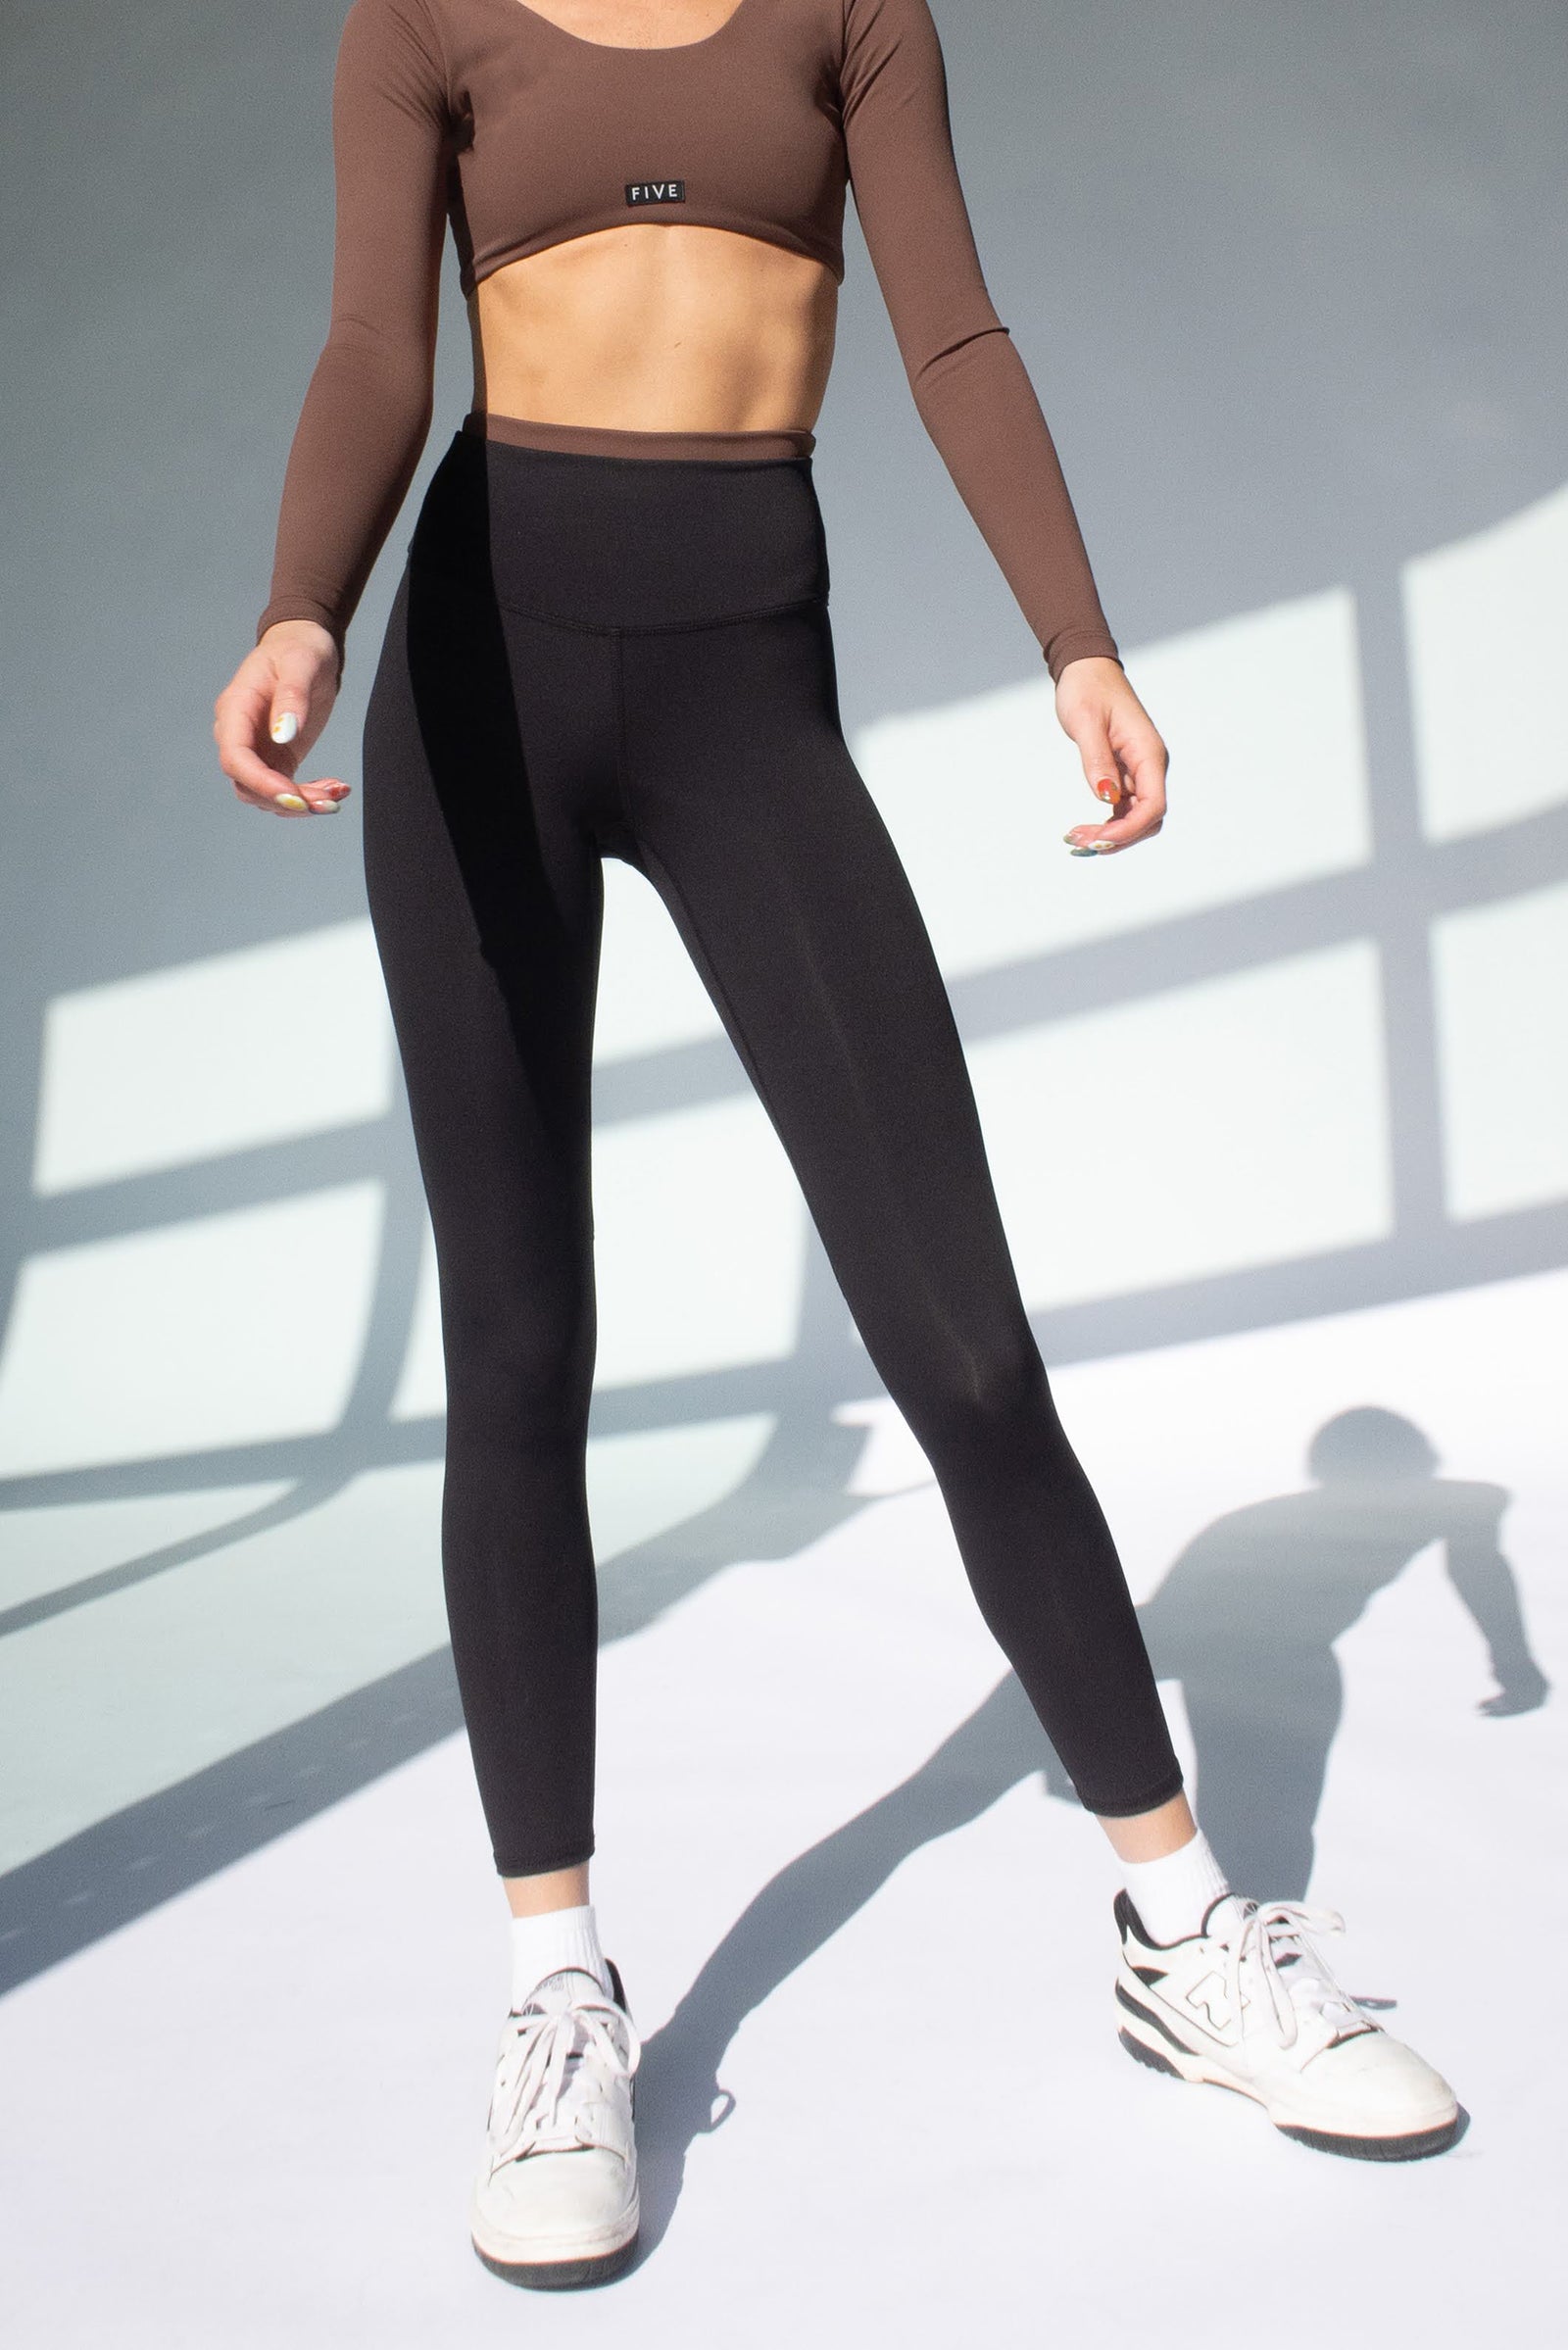 Ballet Wrapped Leggings – The Added Touch